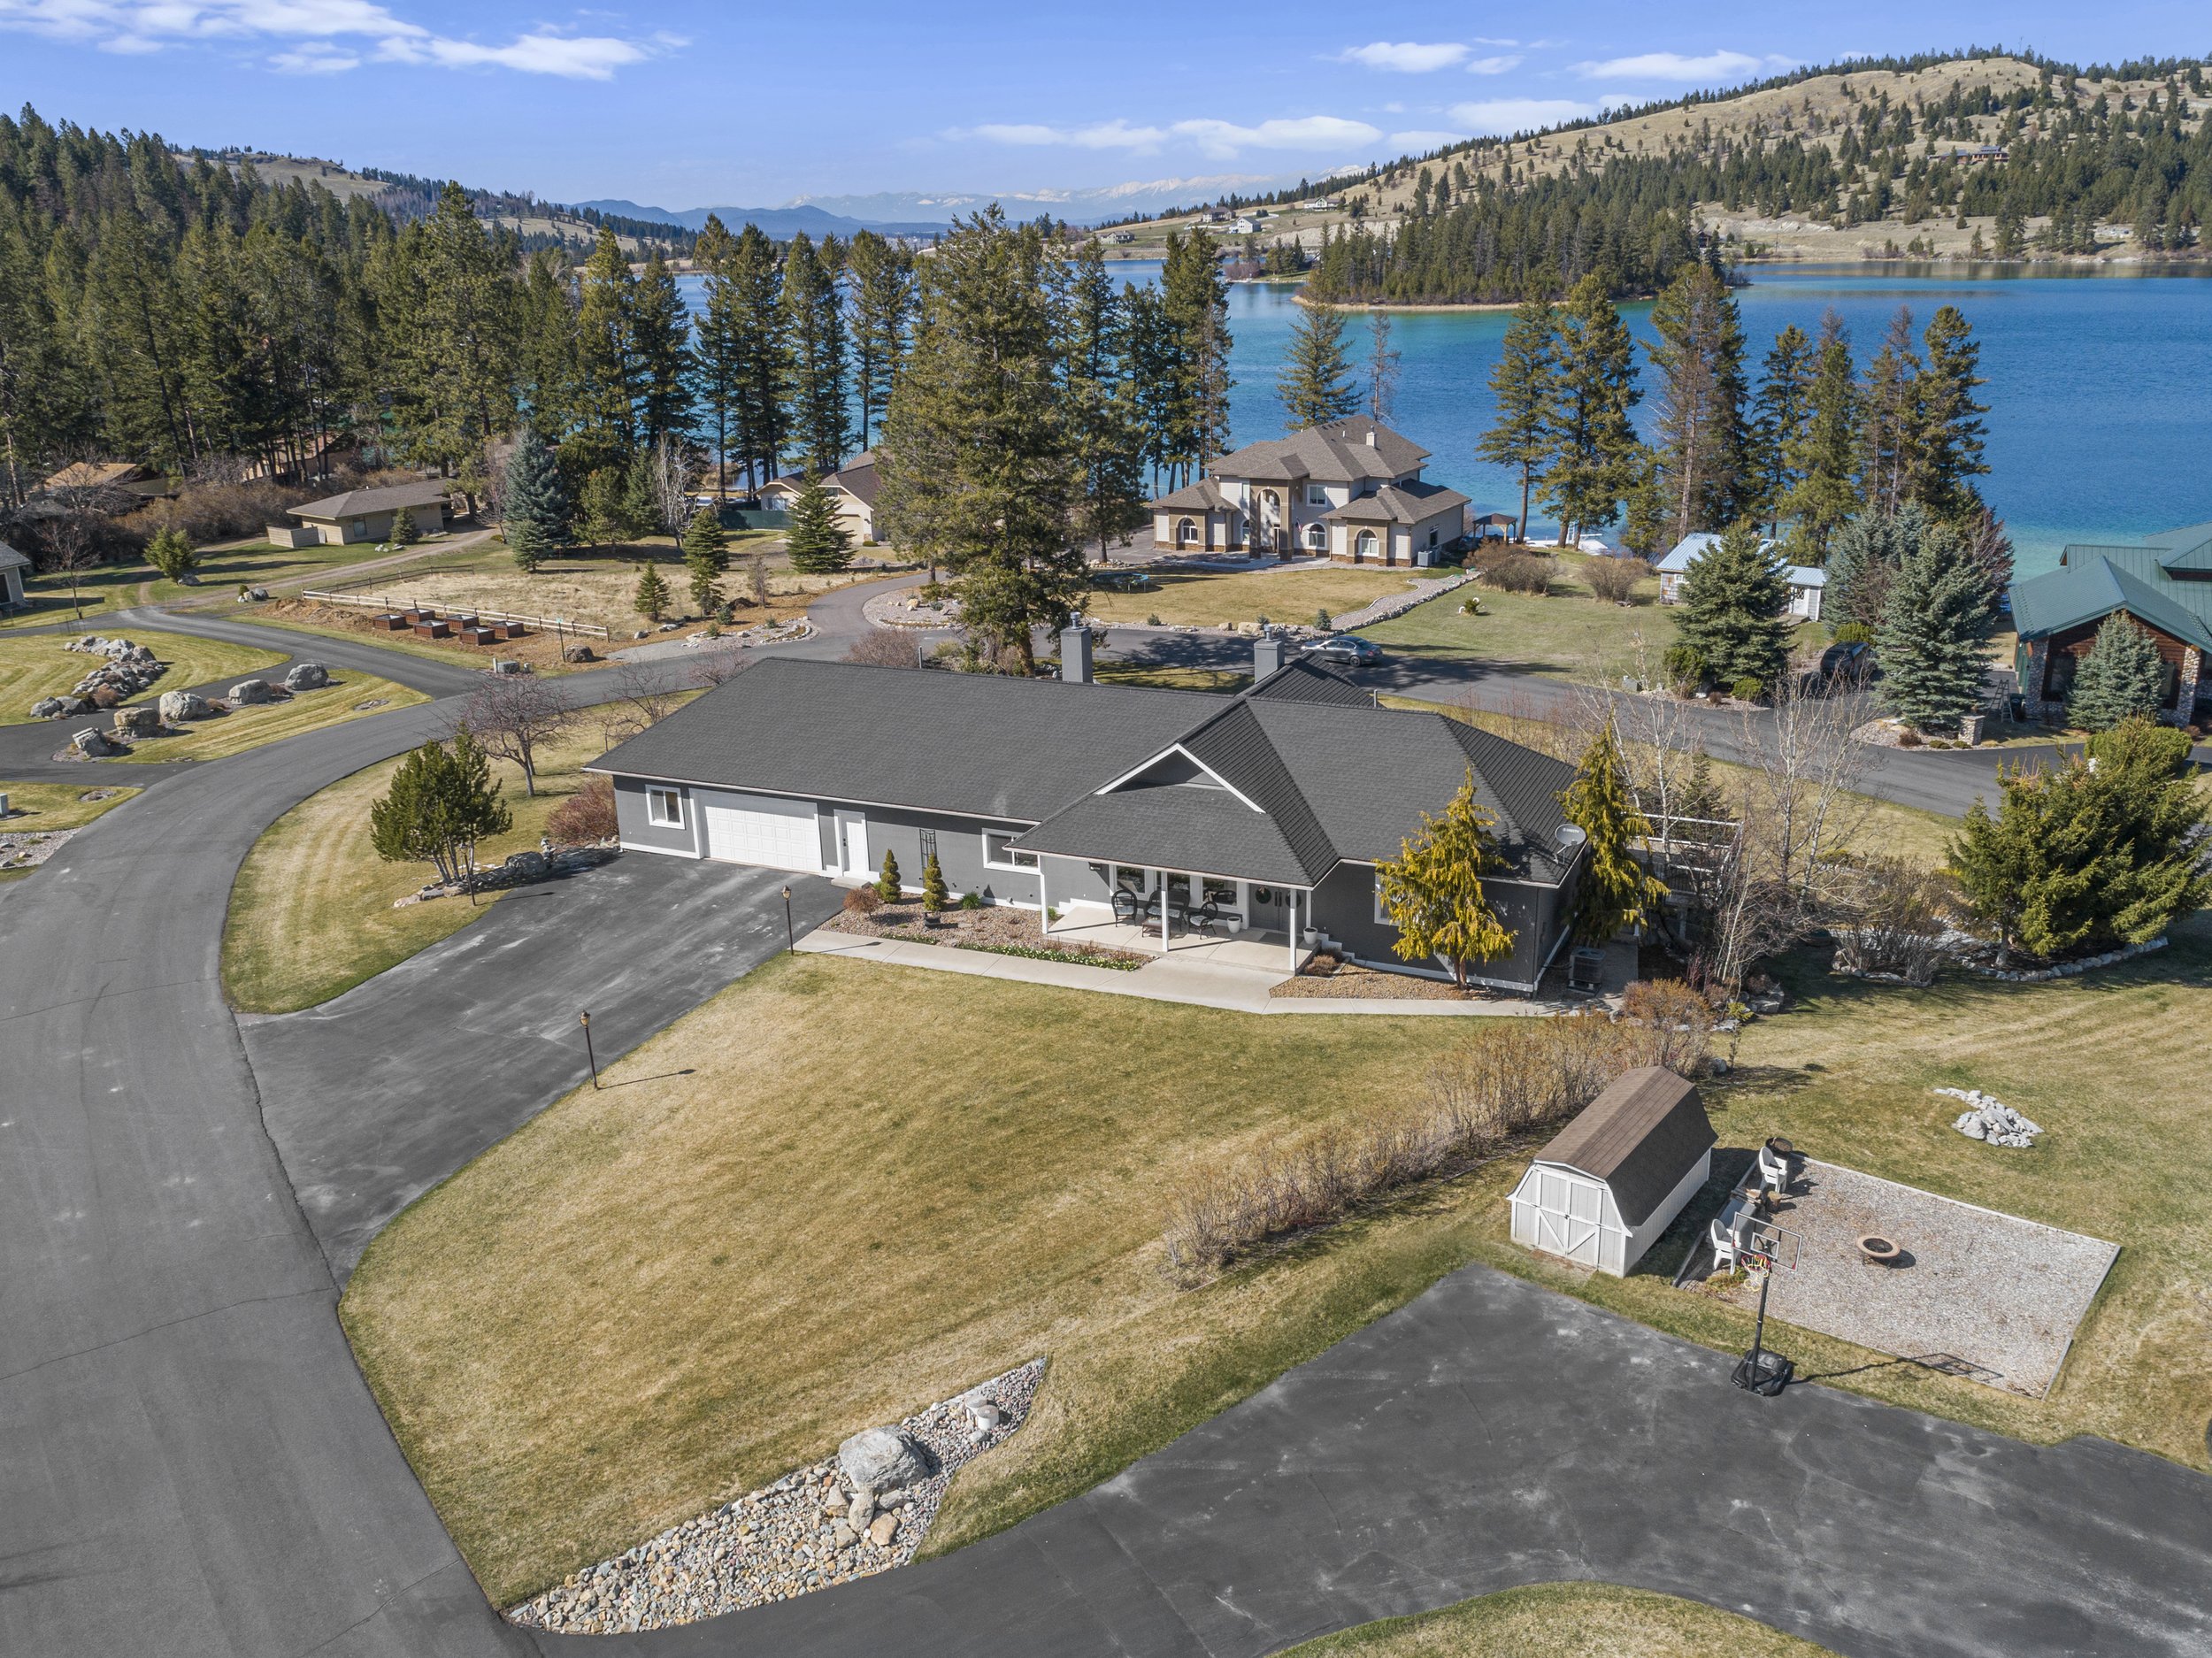 Drone footage for real estate in Kalispell, Montana